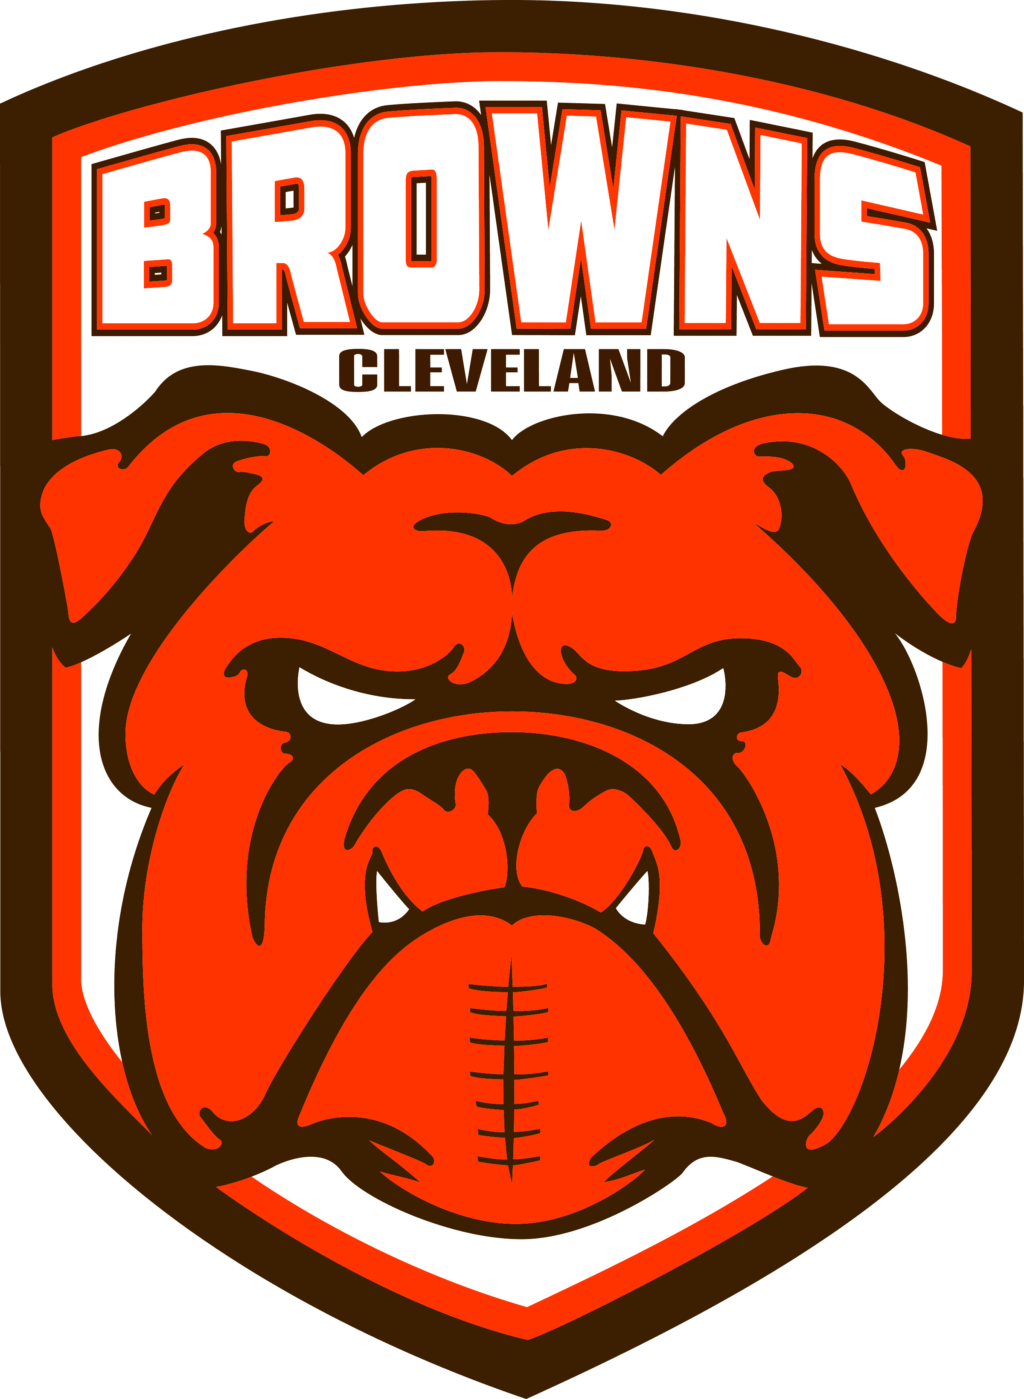 cleveland browns 10 12 Styles NFL Cleveland Browns svg. Cleveland Browns svg, eps, dxf, png. Cleveland Browns Vector Logo Clipart, Cleveland Browns Clipart svg, Files For Silhouette, Cleveland Browns Images Bundle, Cleveland Browns Cricut files, Instant Download.